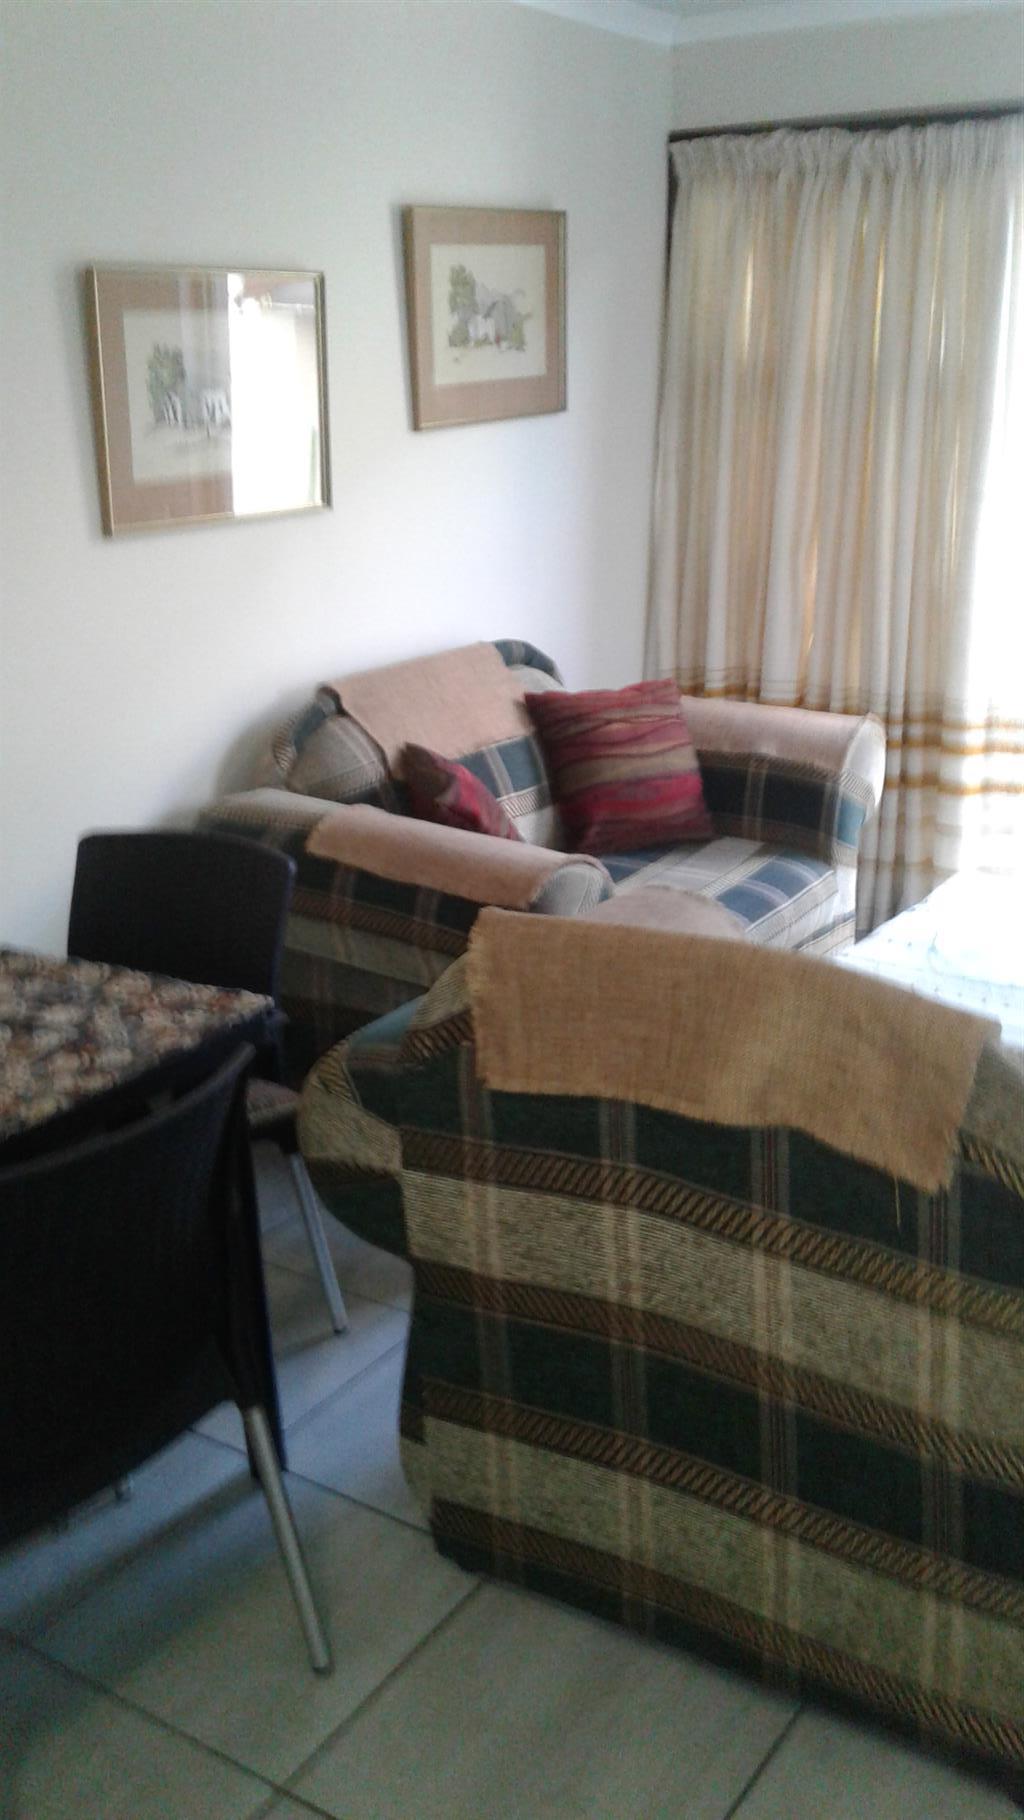 Lovely furnished garden flat to rent Montana Gardens 01/08/22 fibre incl.